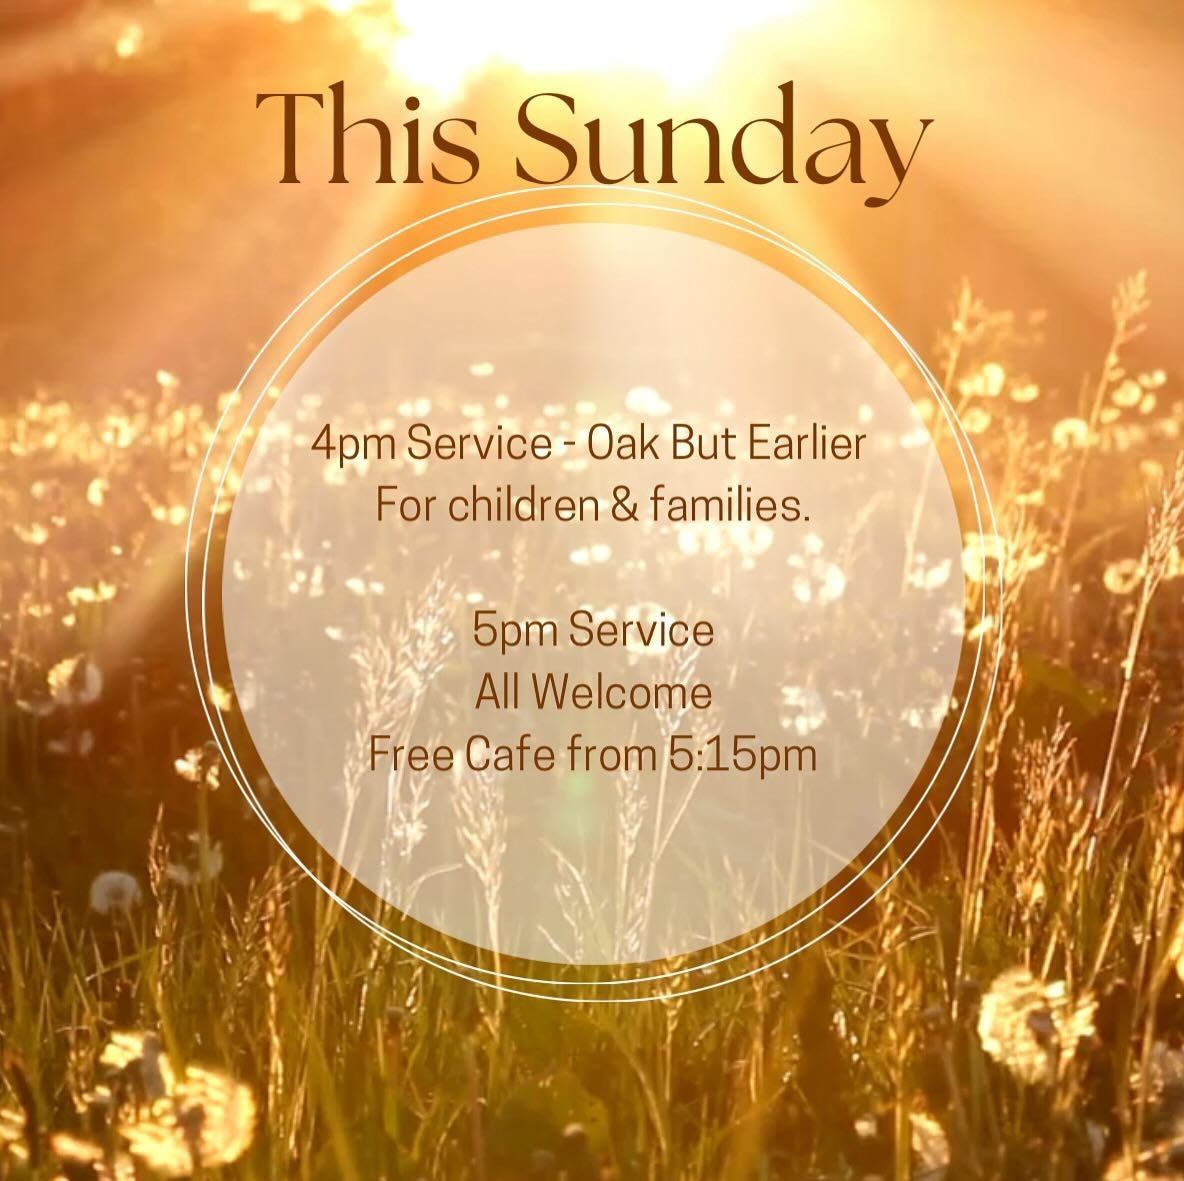 Join us this evening for one of our services! 🌞